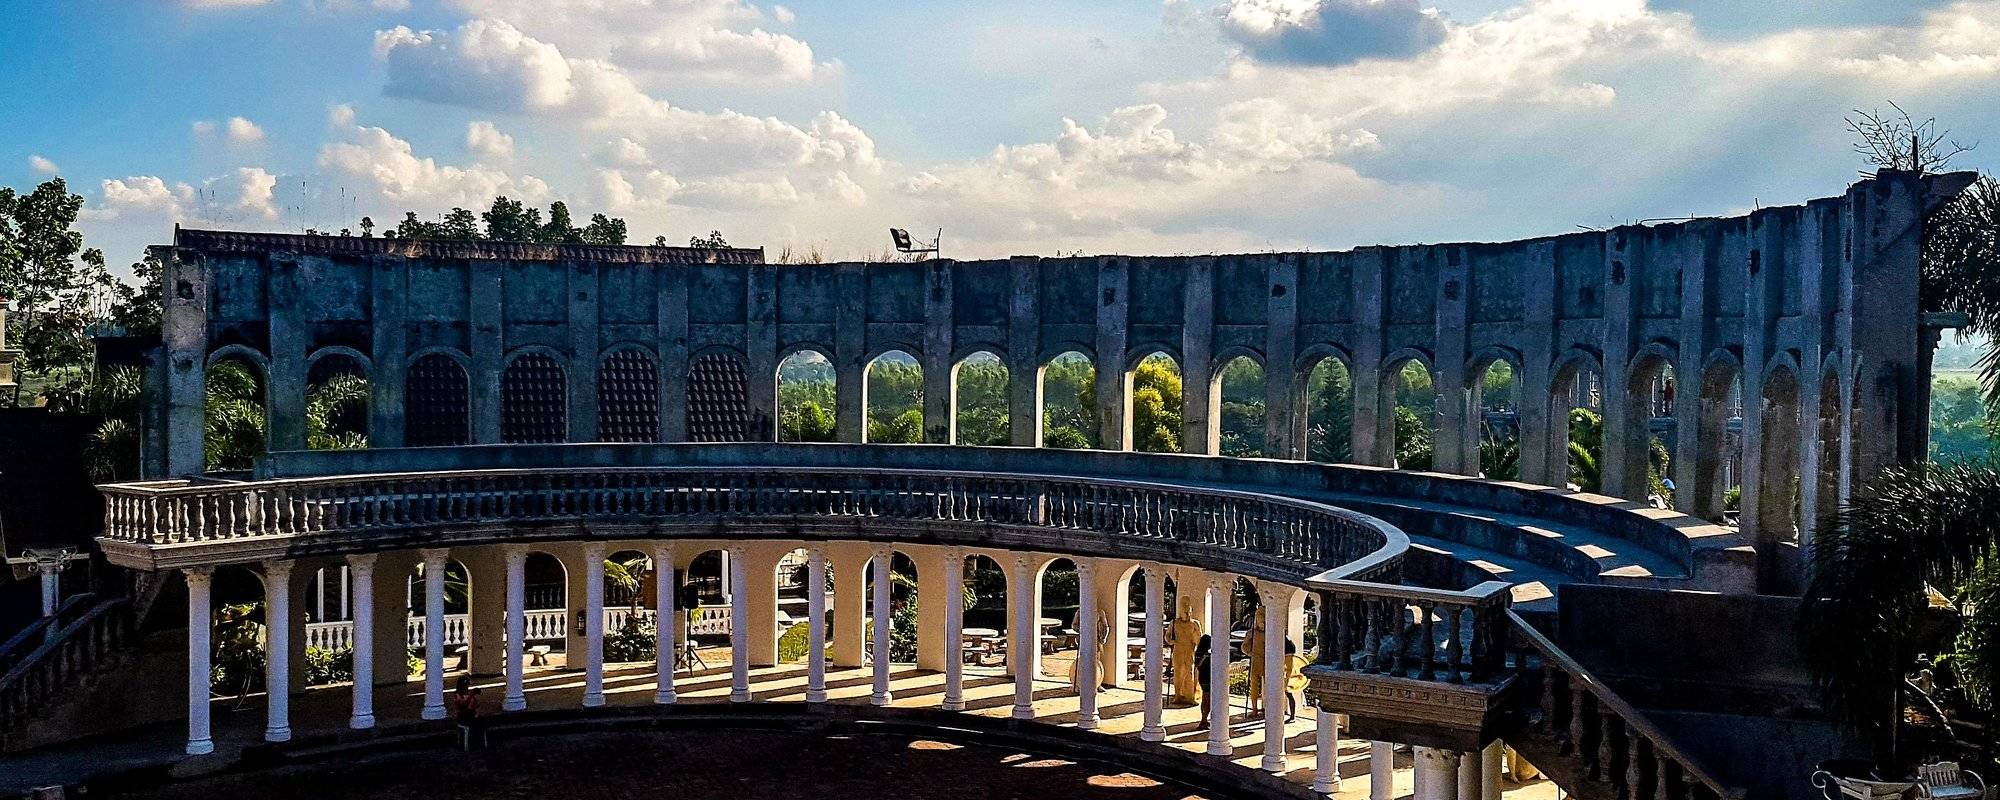 My travel 2018 #2: "Discovering the Roman Colosseum and Festivals of Balloons'"